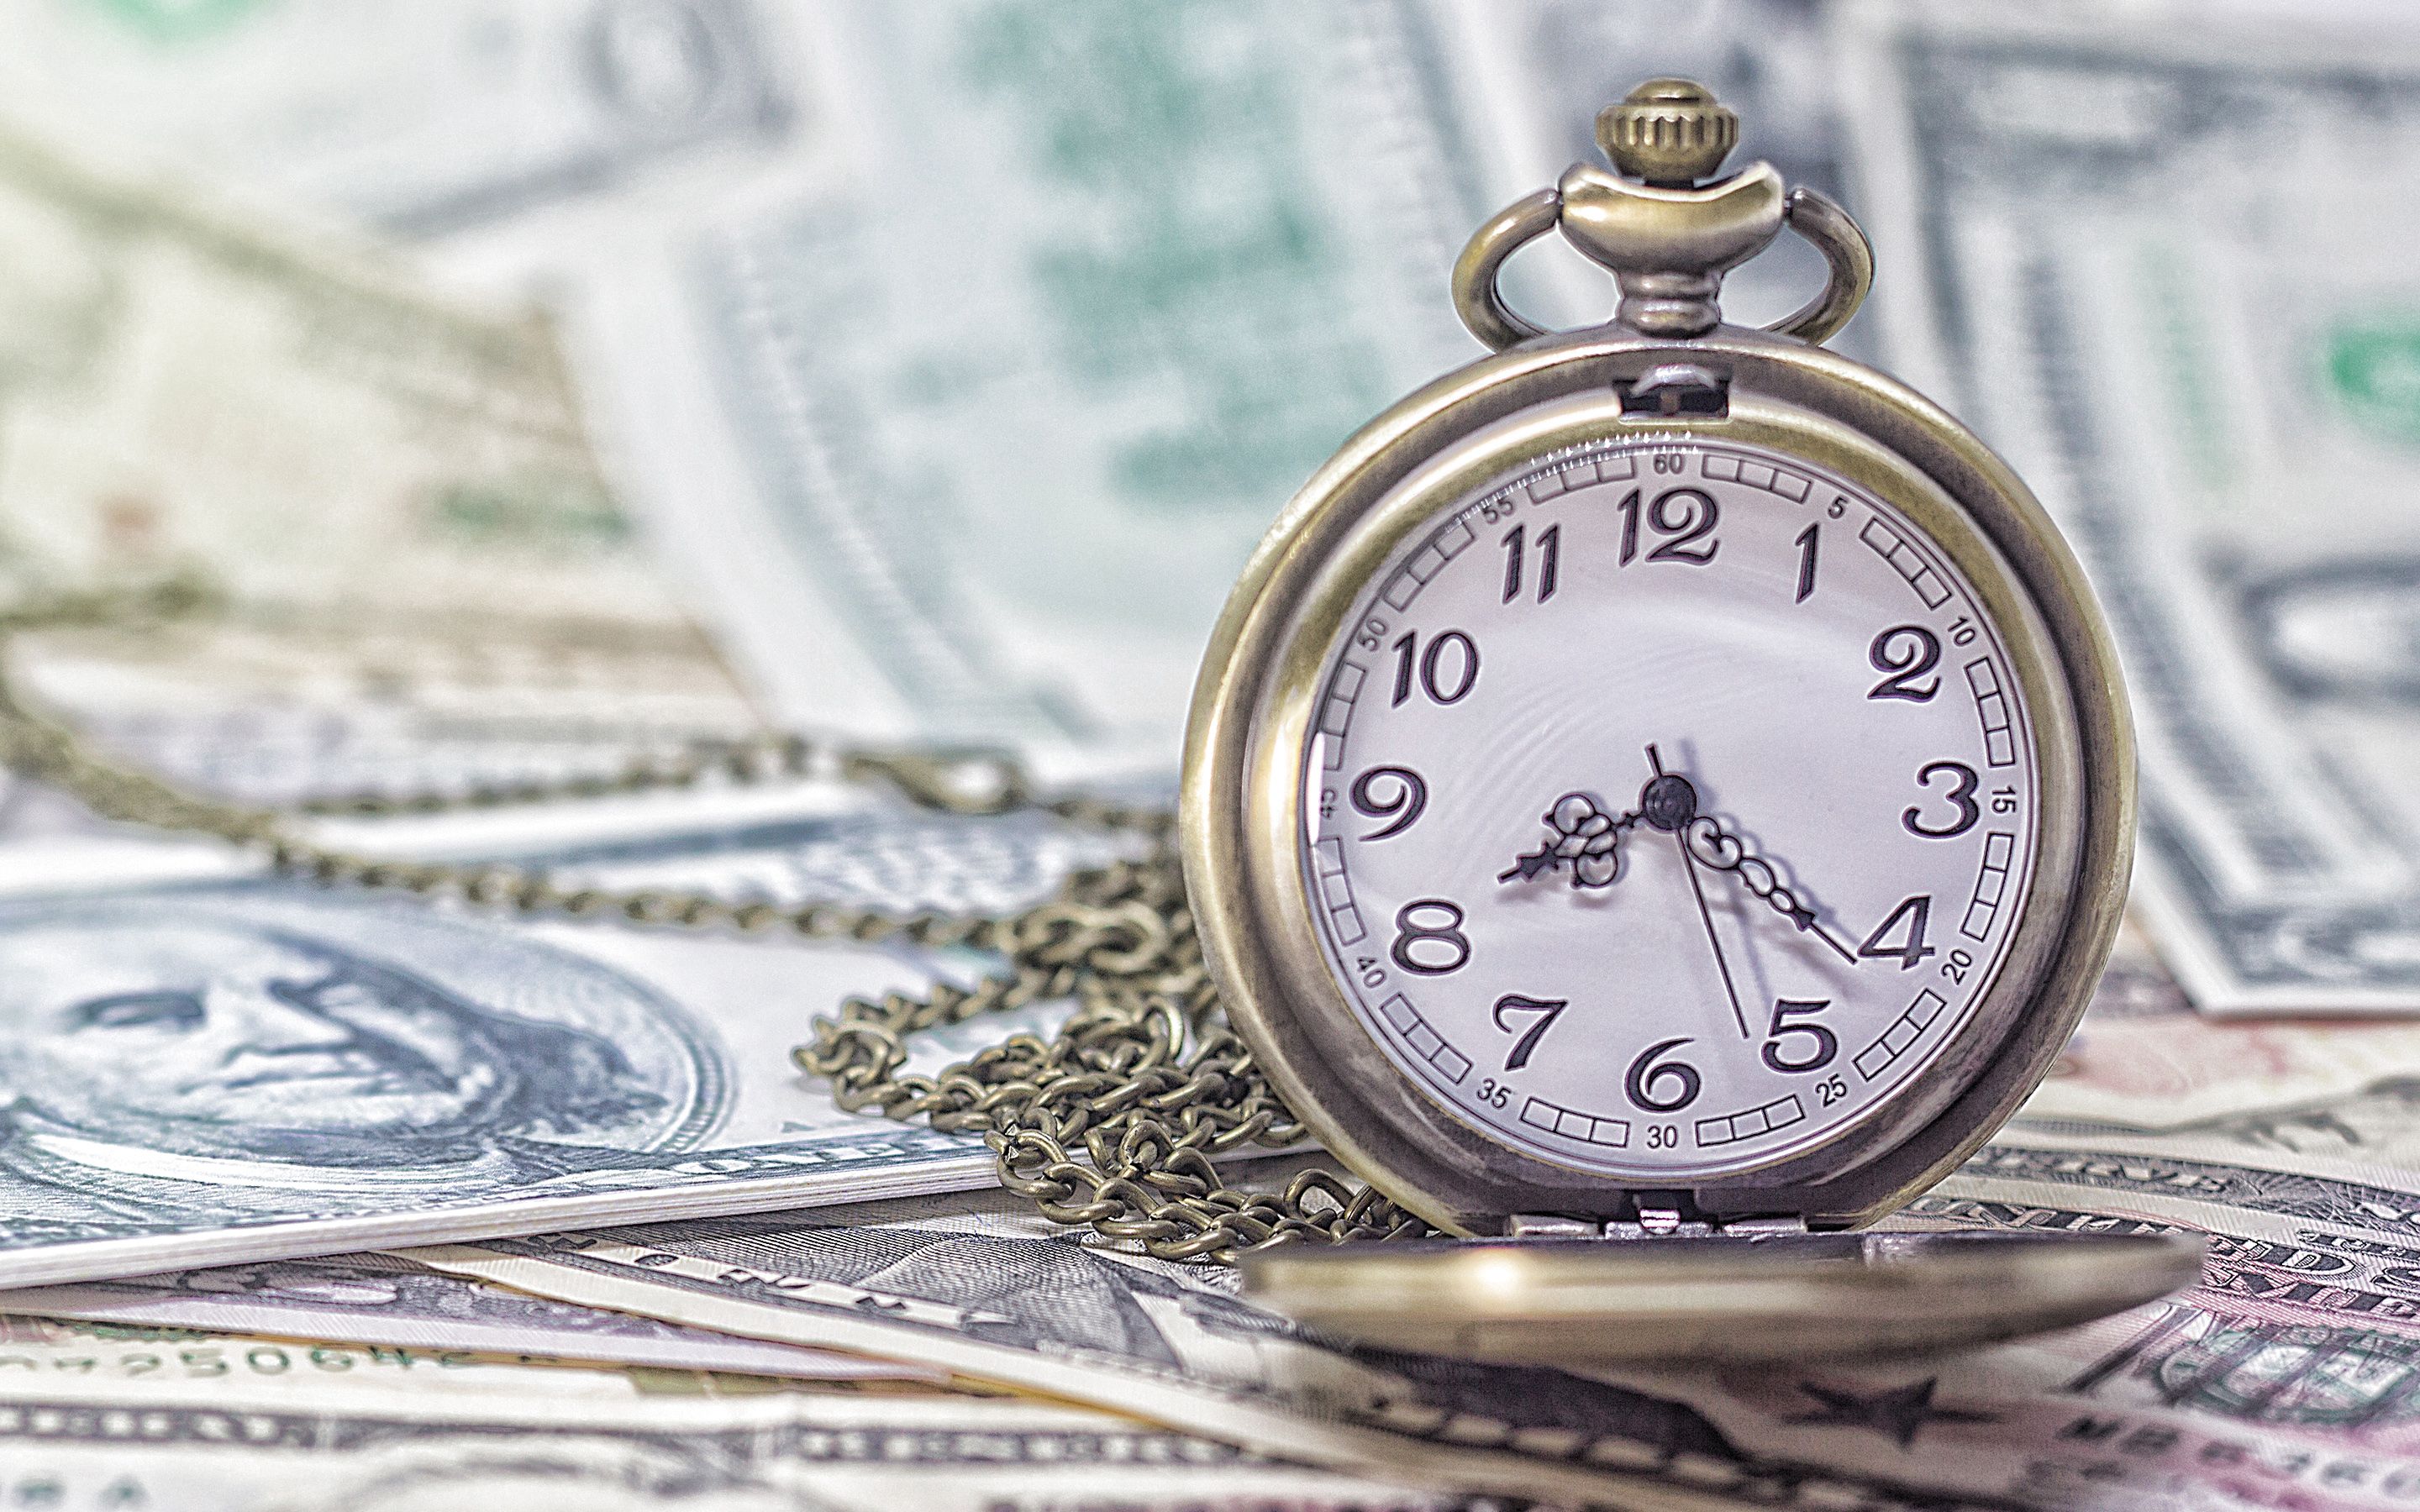 Download wallpaper Time is money, old pocket watch on money, american dollars, money concepts, finance, business for desktop with resolution 2880x1800. High Quality HD picture wallpaper